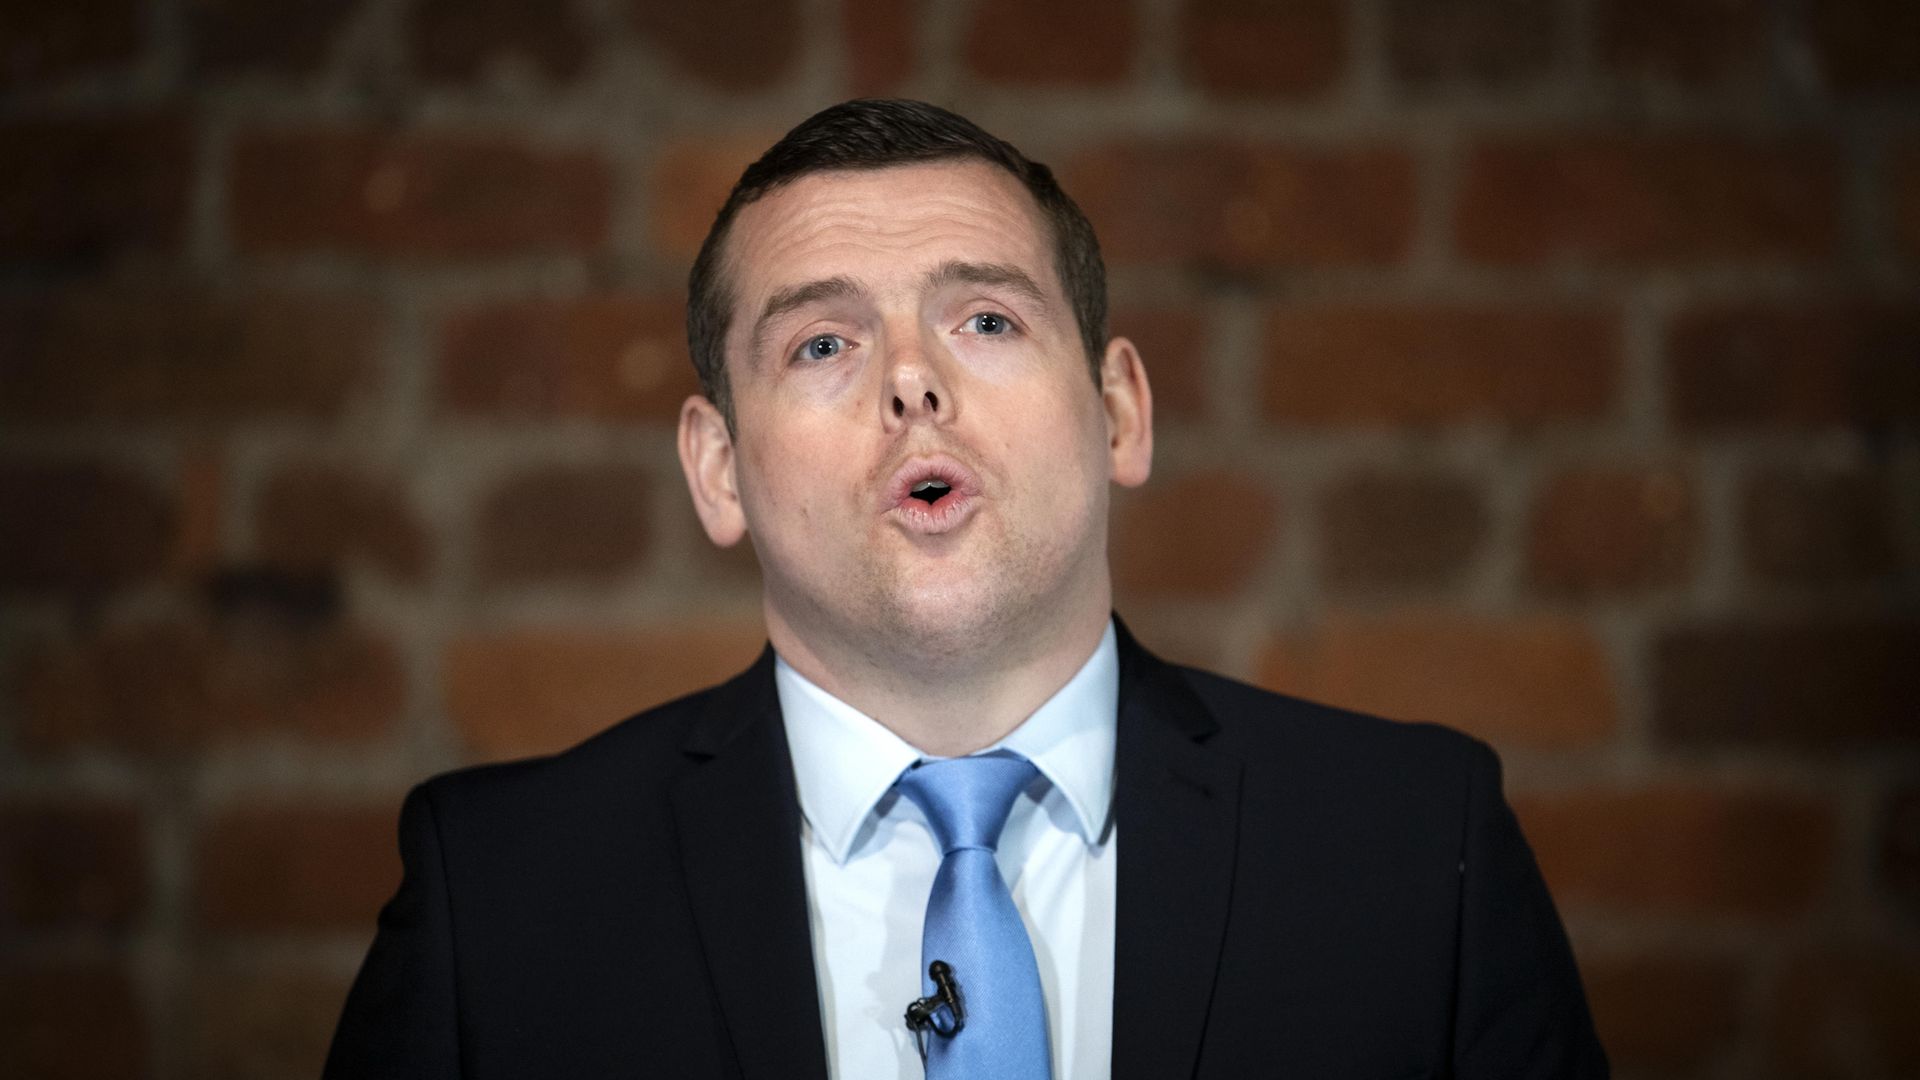 Scottish Conservative leader Douglas Ross said the comments were 'indefensible' - Credit: PA